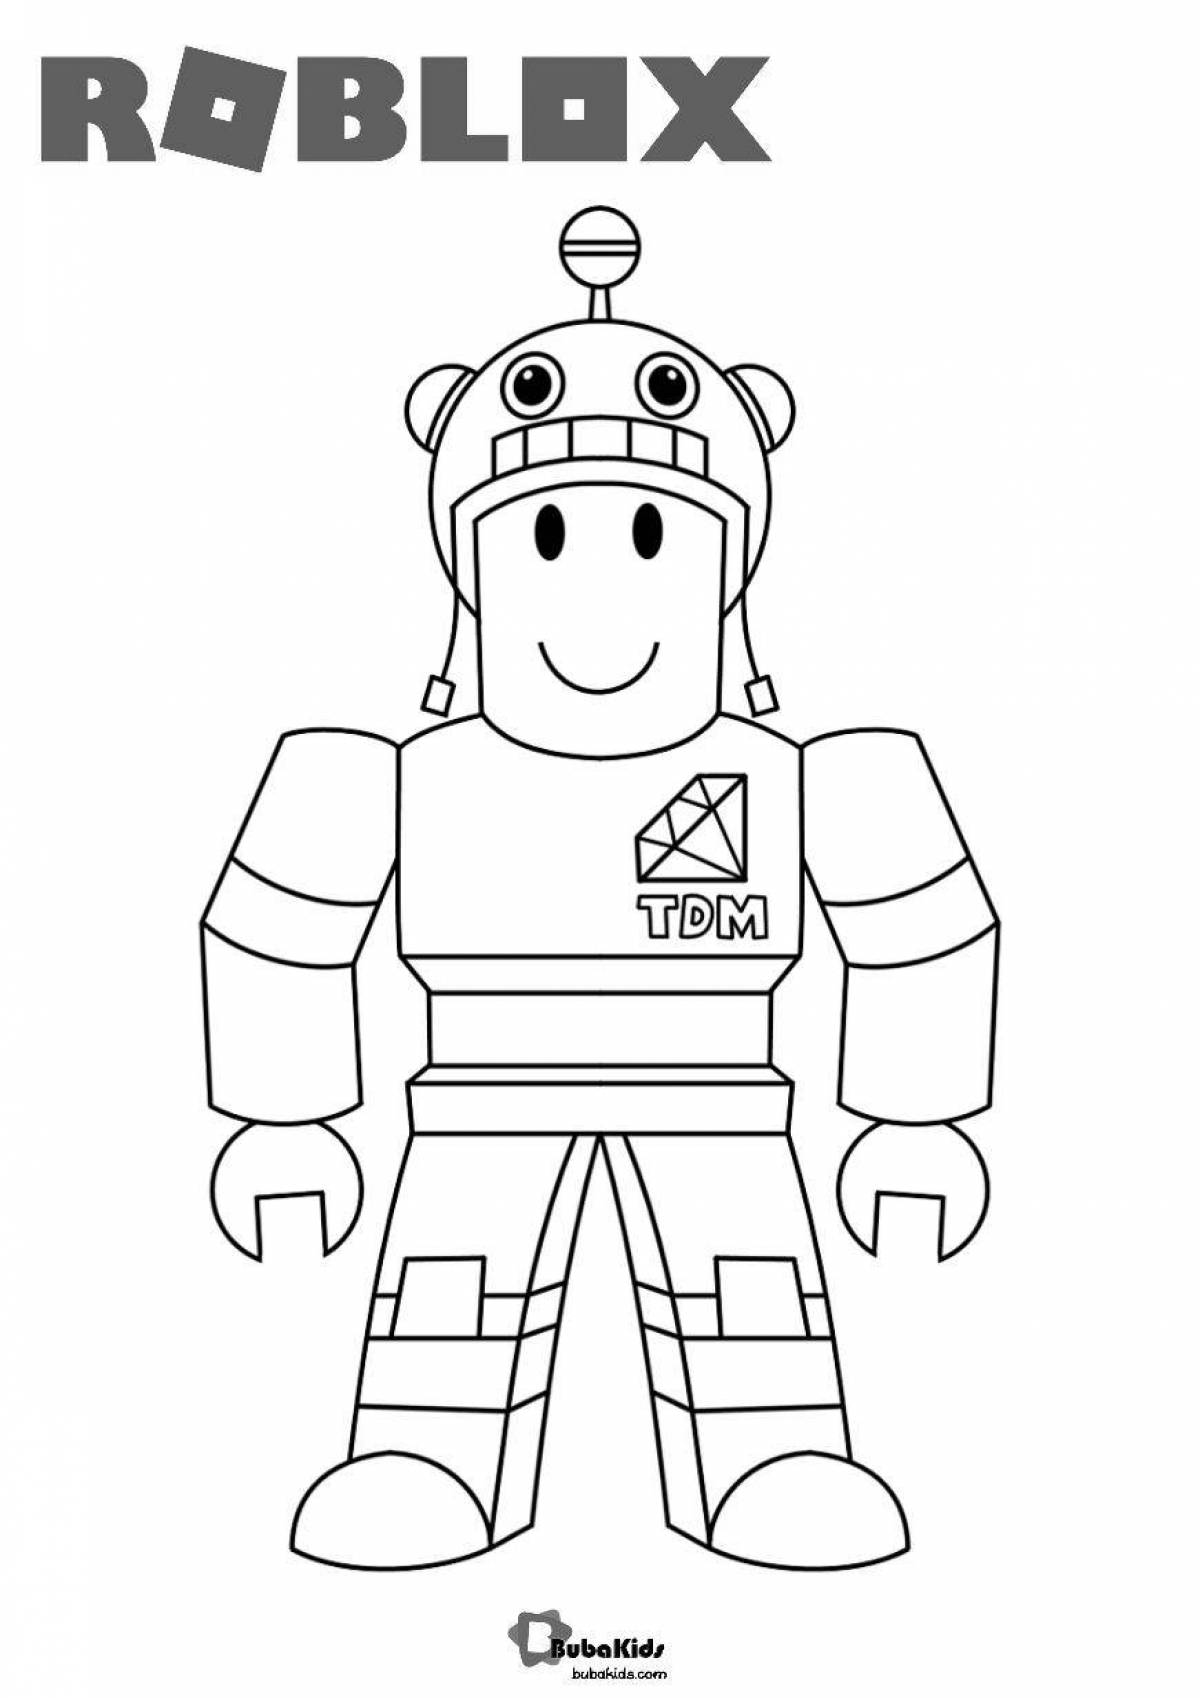 Donator roblox animated coloring page